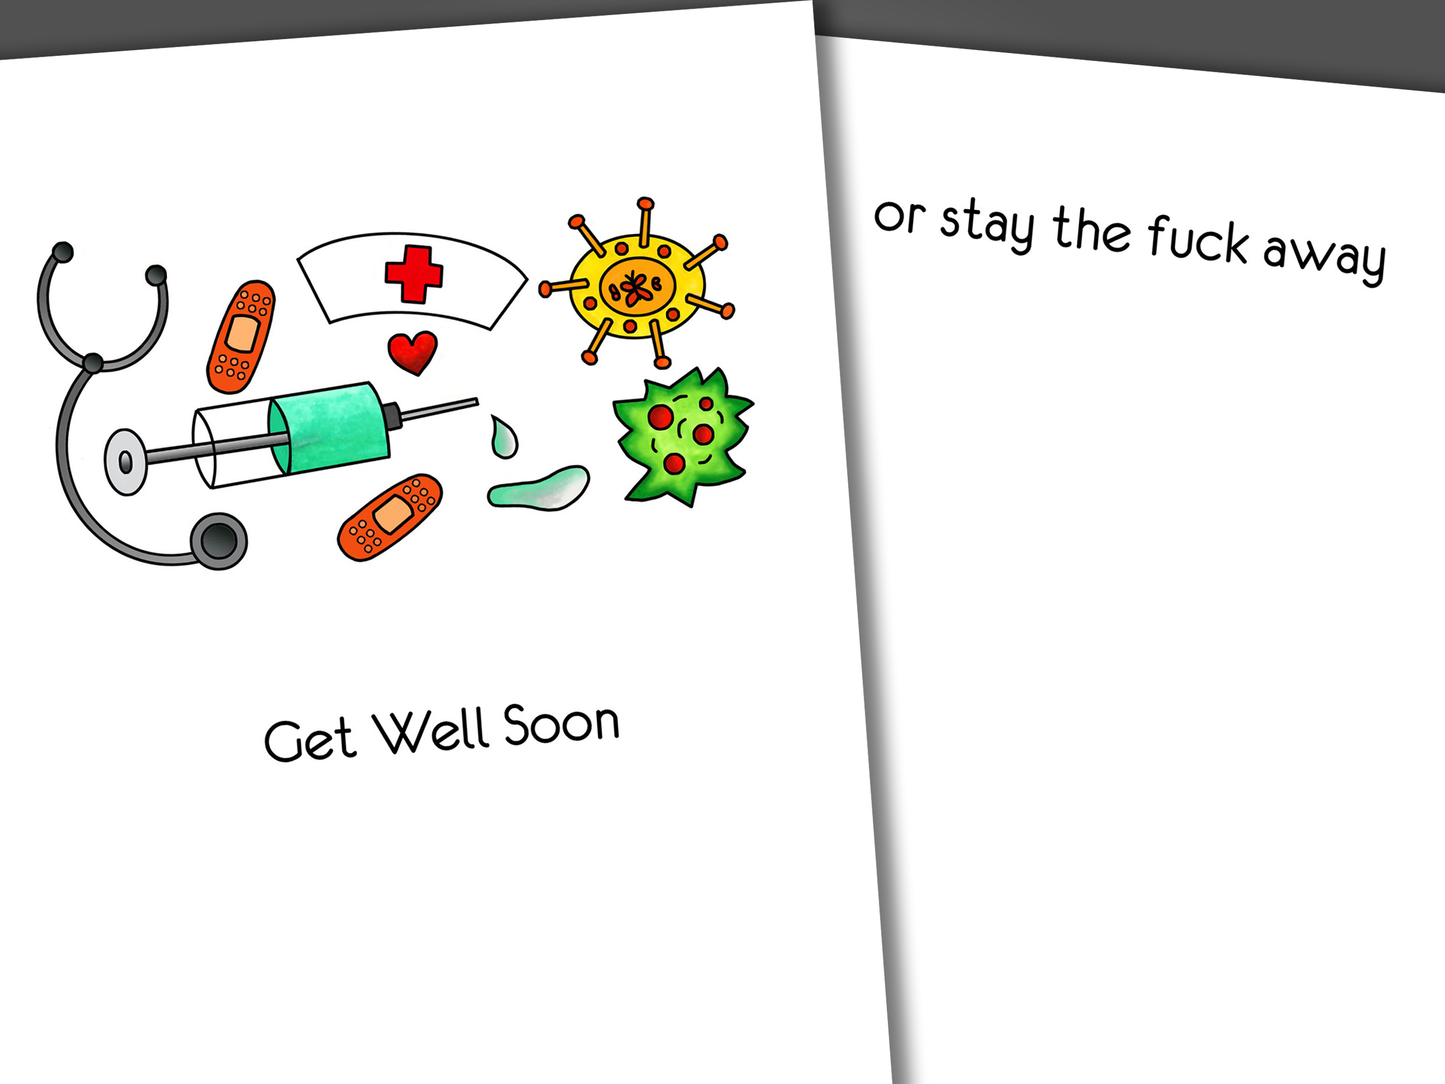 Funny get well soon card with various medical supplies and germs drawn on the front of the card. Inside the card is a funny joke that says stay the fuck away.